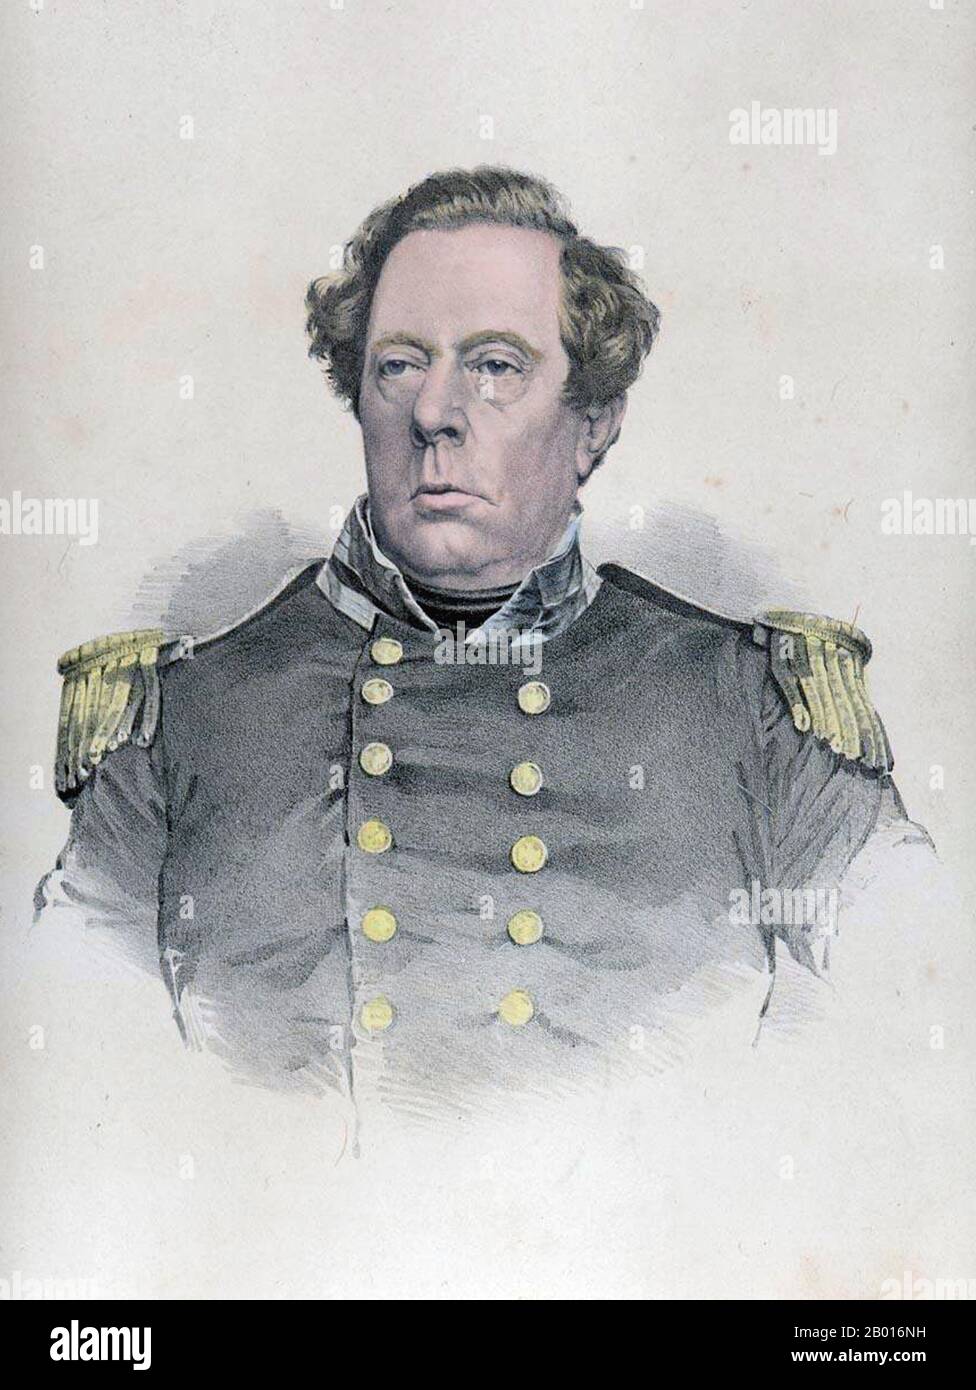 USA: Commodore Matthew Calbraith Perry (10 April 1794 - 4 March 1858). Hand-coloured lithograph, c. 1858.  Matthew Calbraith Perry was a Commodore of the U.S. Navy who compelled the opening of Japan to the West with the Convention of Kanagawa in 1854, when he threatened to bombard Edo (Tokyo) with his ships should they resist. Perry had commanded ships in several wars, including the War of 1812 and the Mexican-American War (1846-1848). His advocacy for the modernisation of the U.S. Navy led to him being called 'The Father of the Steam Navy'. Stock Photo